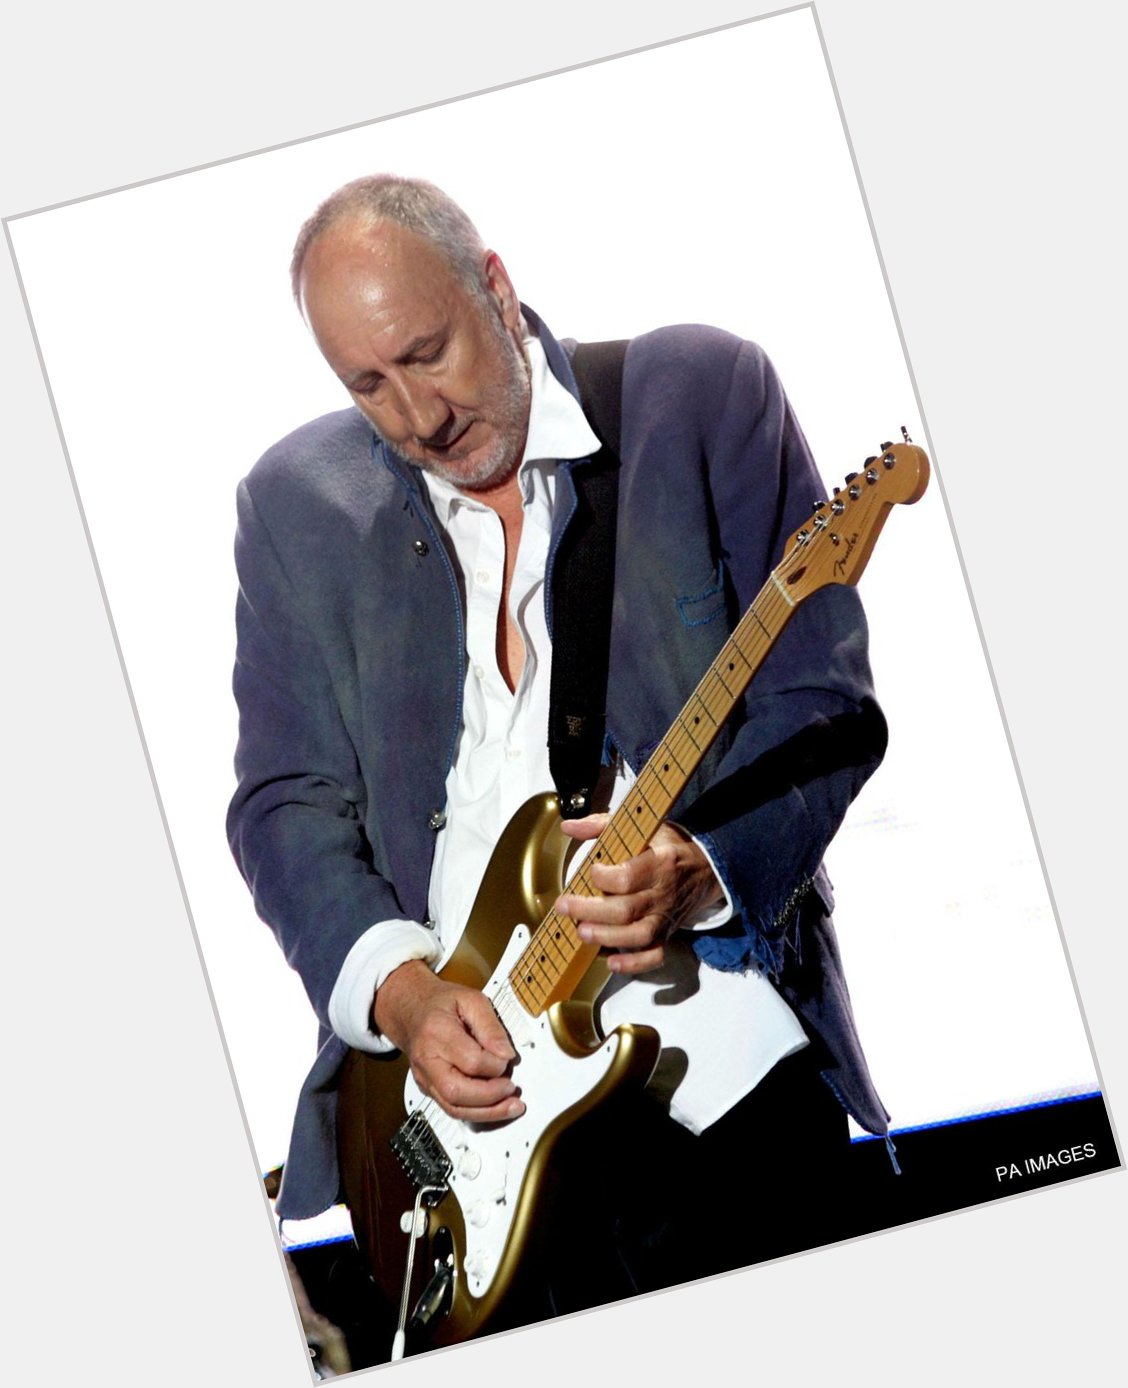 A huge happy birthday to Pete Townshend of on his 70th today!. Have a great one anyway, anyhow, anywhere! 